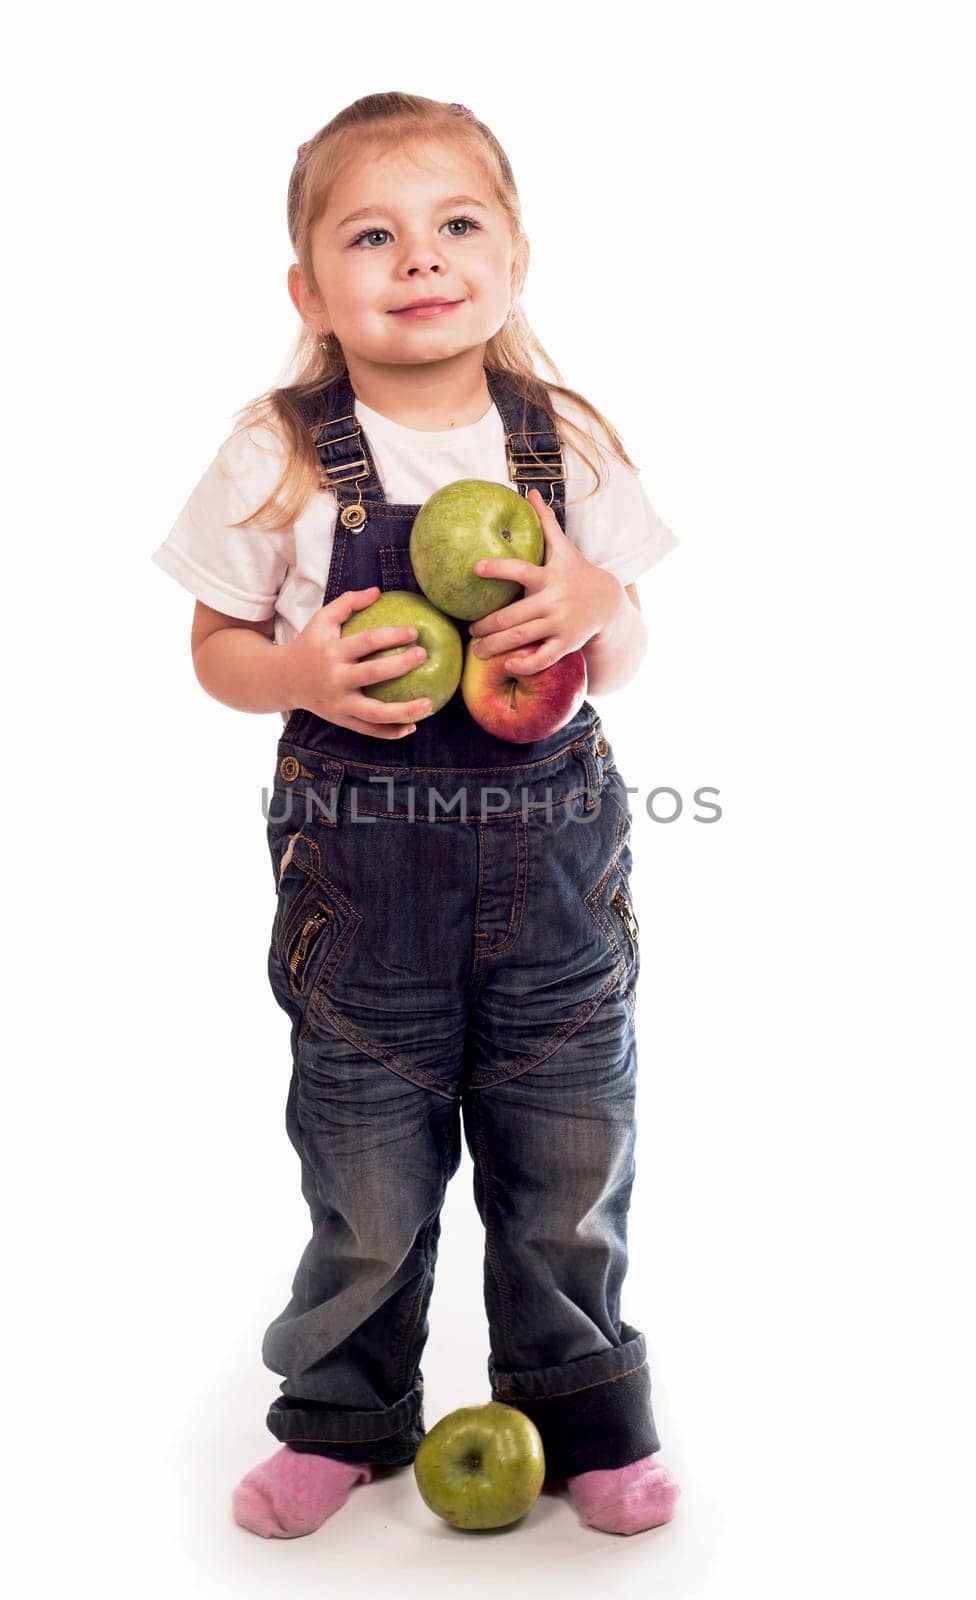 The little girl plays with apples by aprilphoto